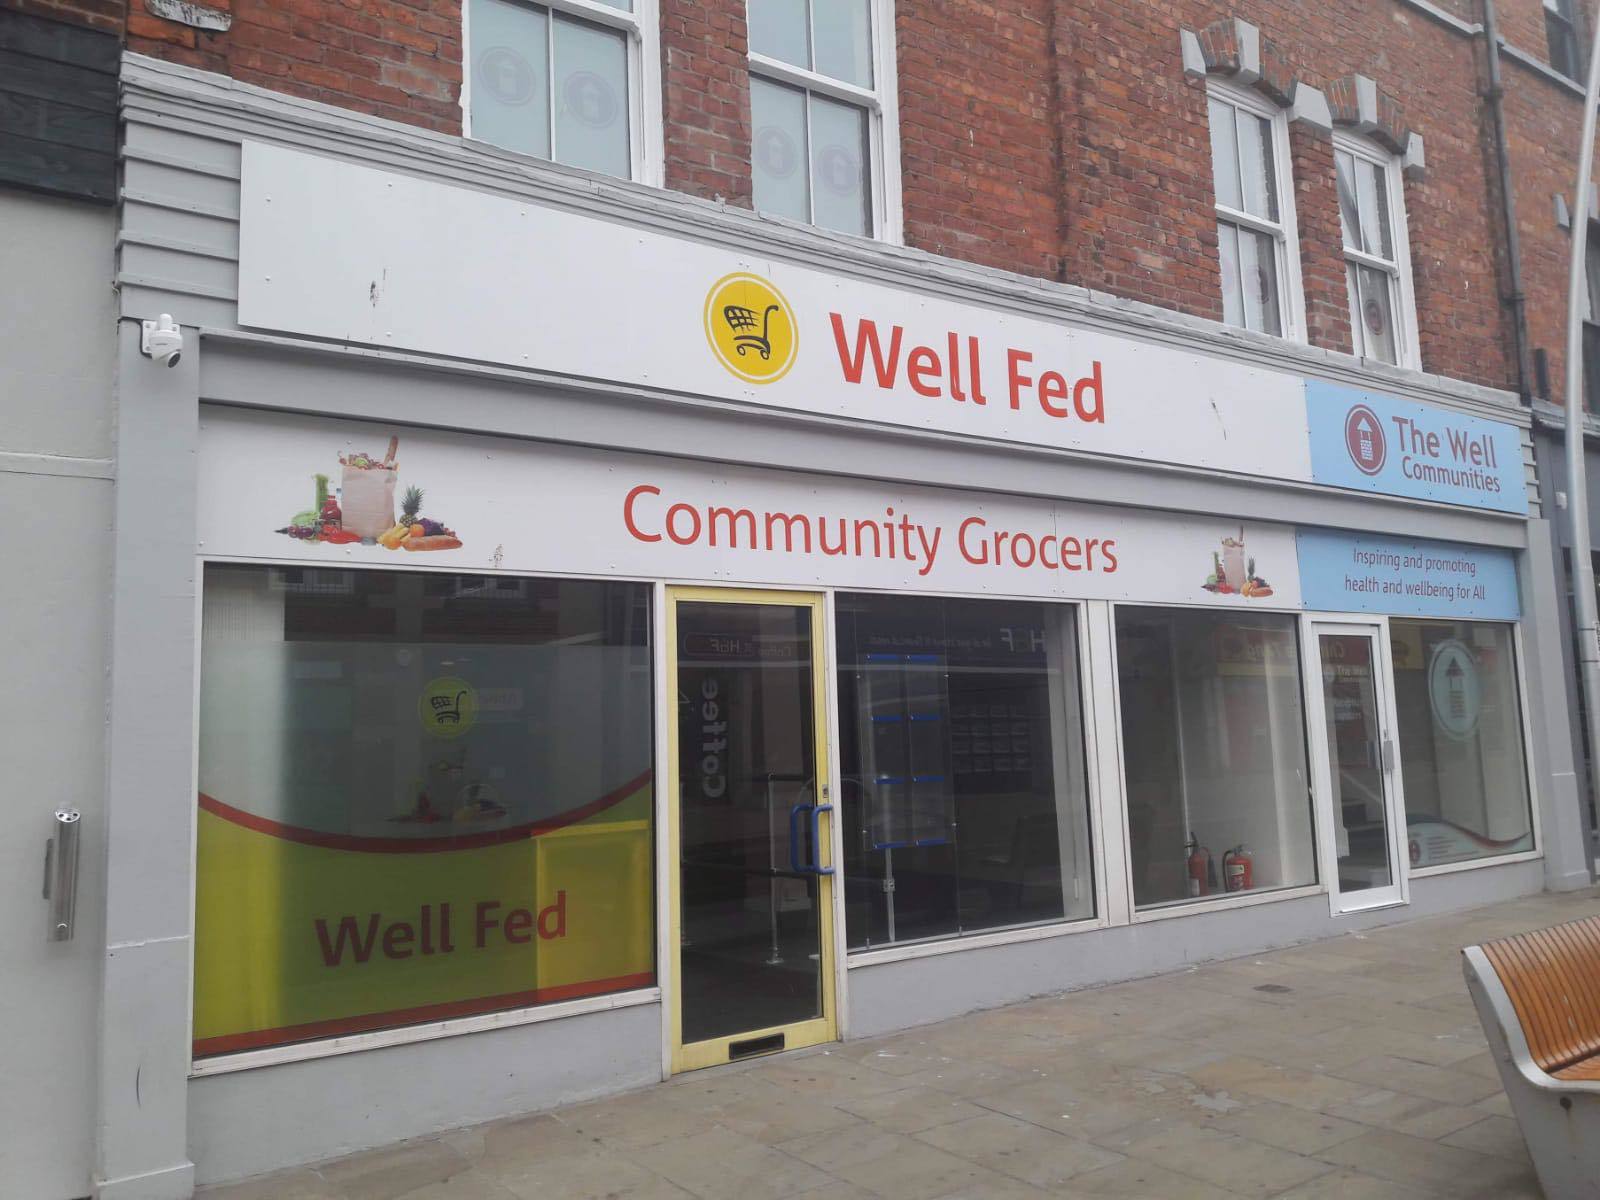 SHOP: The Well’s food hub where Lee has volunteered his time 